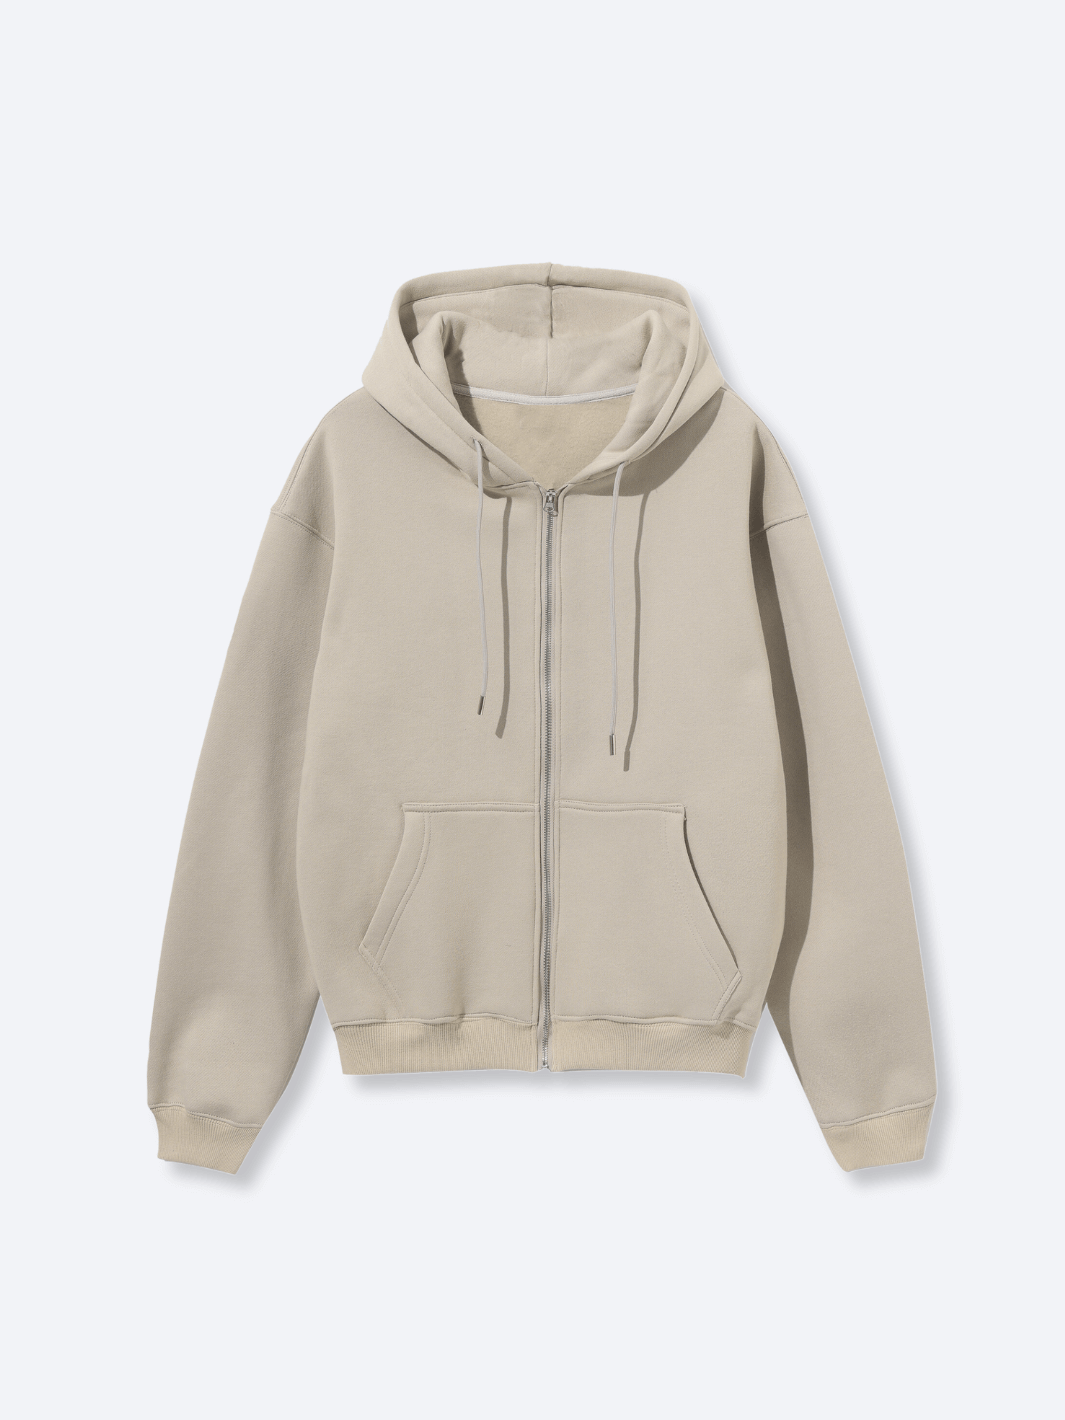 "TO WHOM IT MAY CONCERN" 2.0 ZIP-UP HOODIE - LIGHT OAT